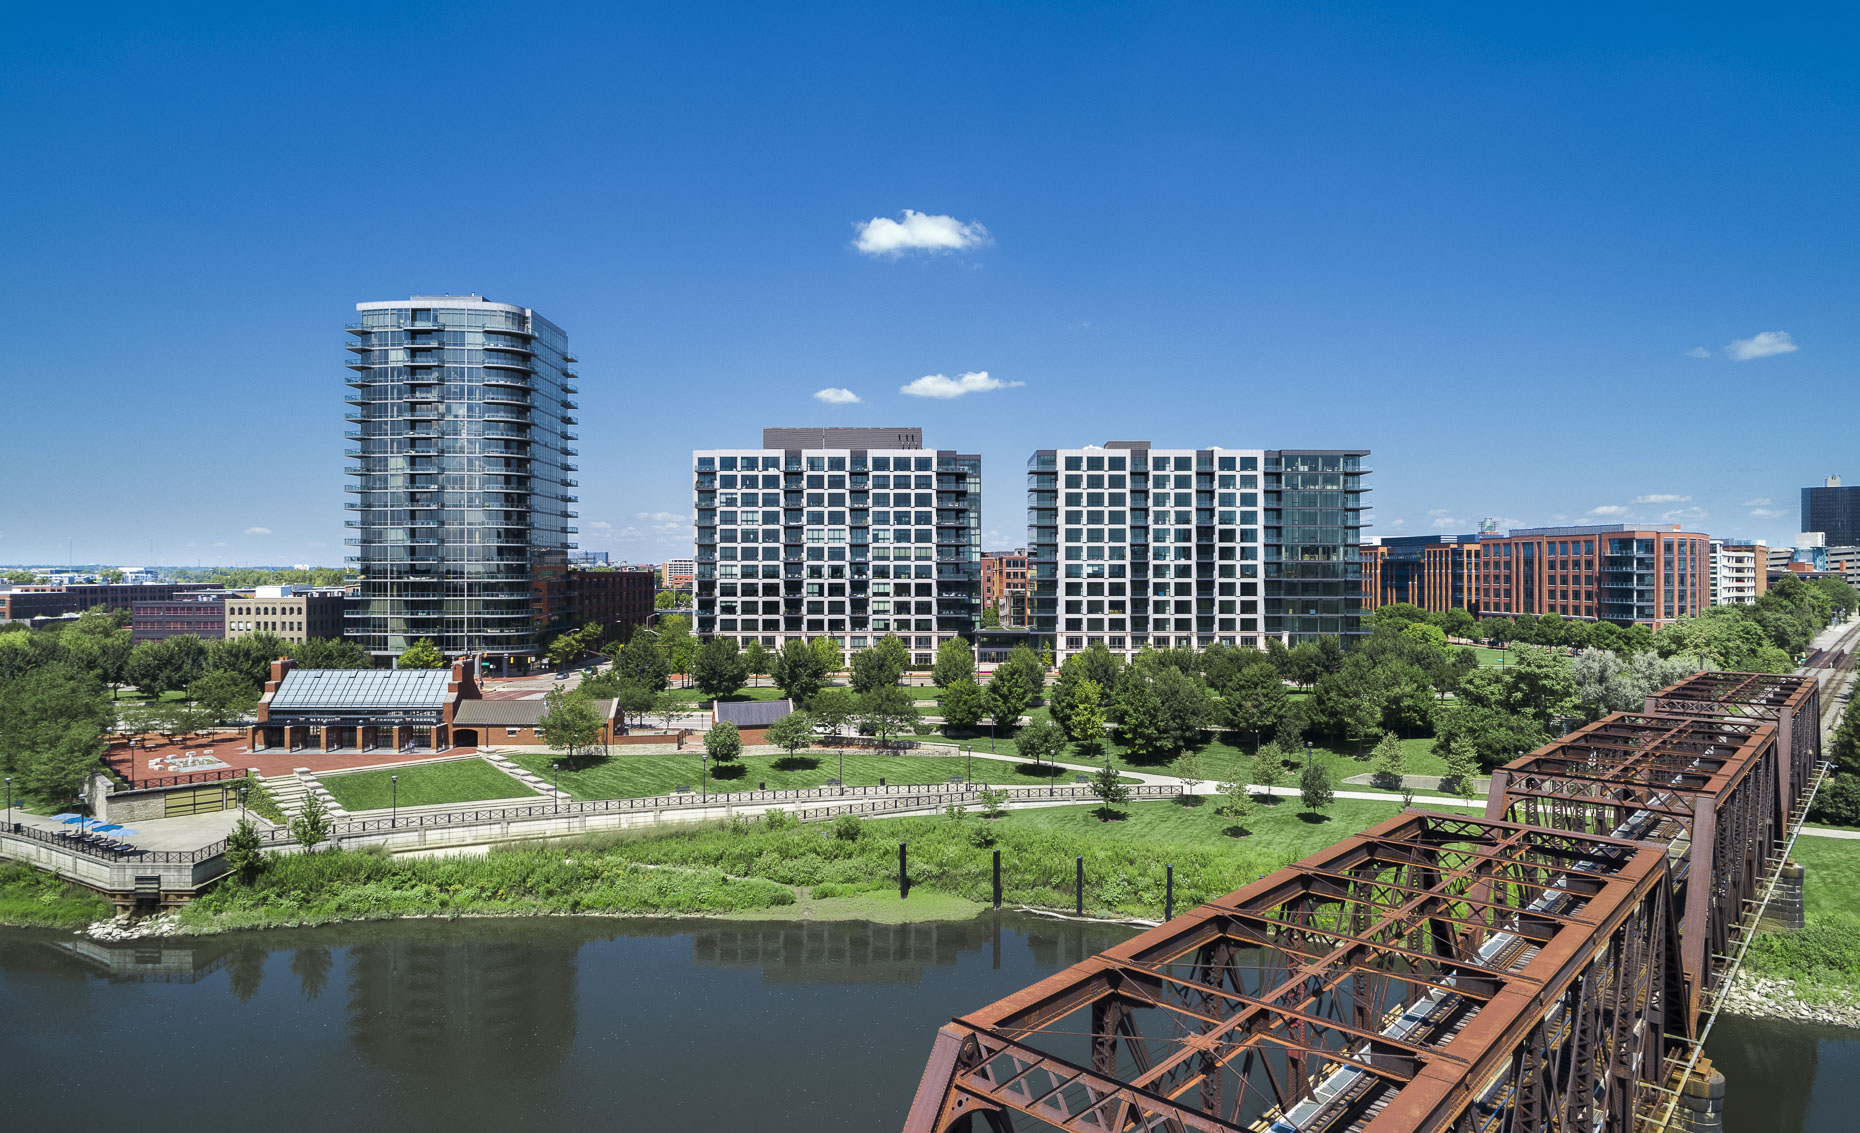 Parks Edge Condominiums by Nationwide Reality Investors photographed by Lauren K Davis based in Columbus, Ohio